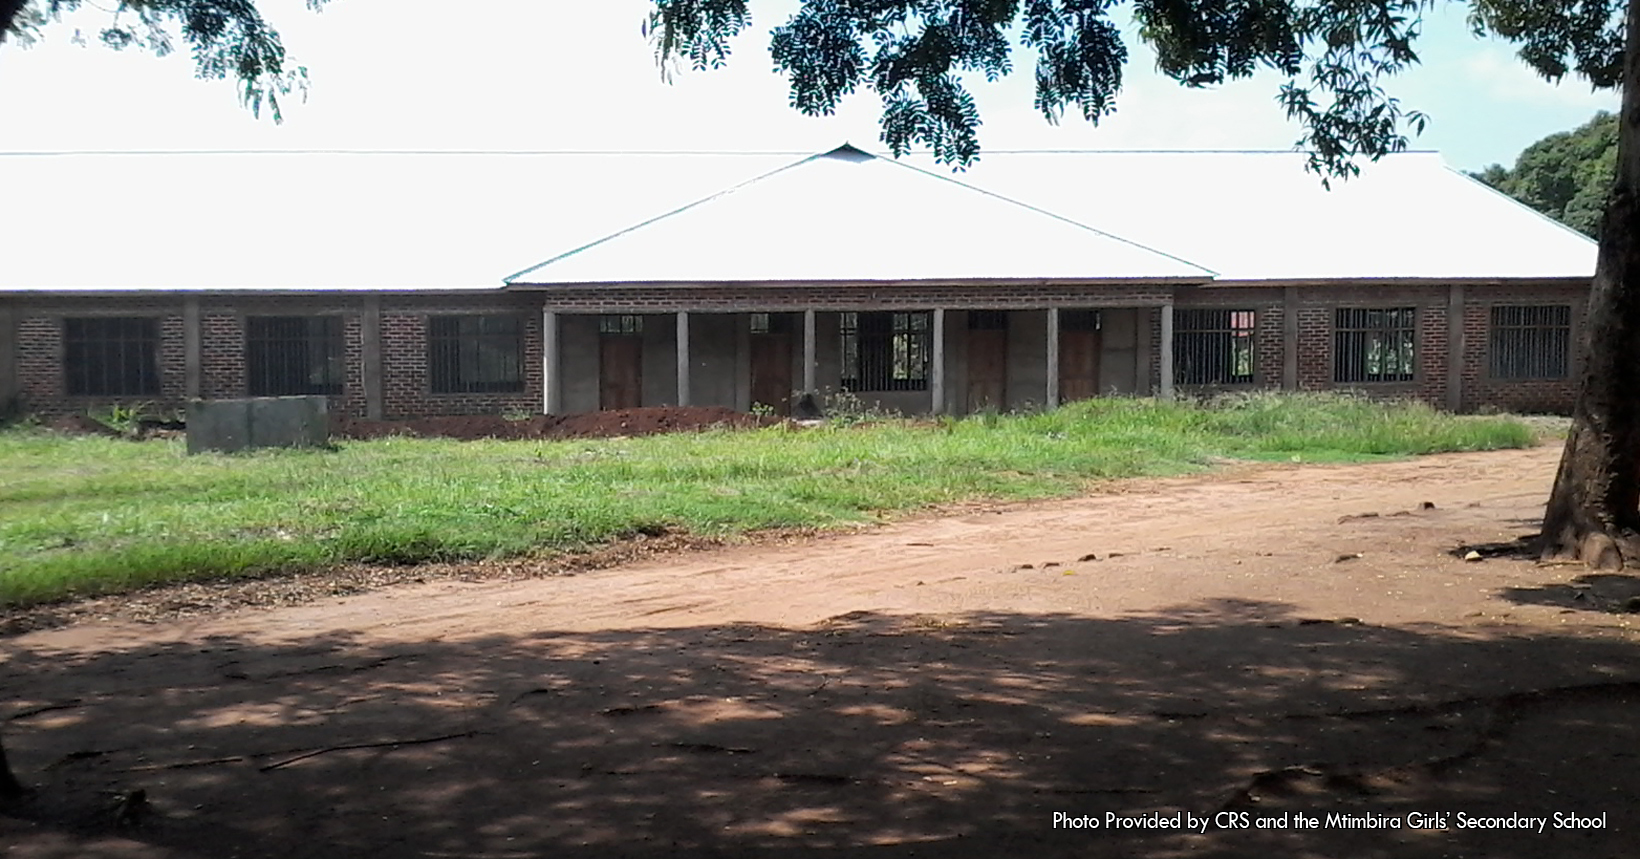 The associated picture was taken and given to us by the Catholic Relief Services. The following picture was taken right outside the Library and Staff room. The Library and Staff room like the rest of the school is made out of bricks. In addition, the top of the Library and Staff room is white in color like the rest of the school. In front of the building are four doors and 7 windows. In front of the 4 doors are 6 gray columns. As for the windows they are all surrounded by the brick layout of the building. In addition, each of the windows have dividers in them that cuts the windows into rectangles. Outside of the building is a small grass plain as well as a dirt road. The grass area has a couple of things that are sitting on top of it. One of the objects that are sitting on the grass is a giant pile of dirt. The pile of dirt is located to the left of the photo and stretches relatively far. The pile of dirt starts from the second door to the left all the way to the last window on the left side of the photo. There is also a gray rectangle block sitting right in front of the pile of dirt. In like manner the dirt road is also in front of the Library and Staff room. The dirt road starts from the front doors of the building and curves outwards toward the picture. Sitting on the side of the dirt road is a giant tree whose leaves provide shade to a section of the dirt road. This building is used to keep books for the student to study. In addition, the building is used by the staff to come to plan out their day.